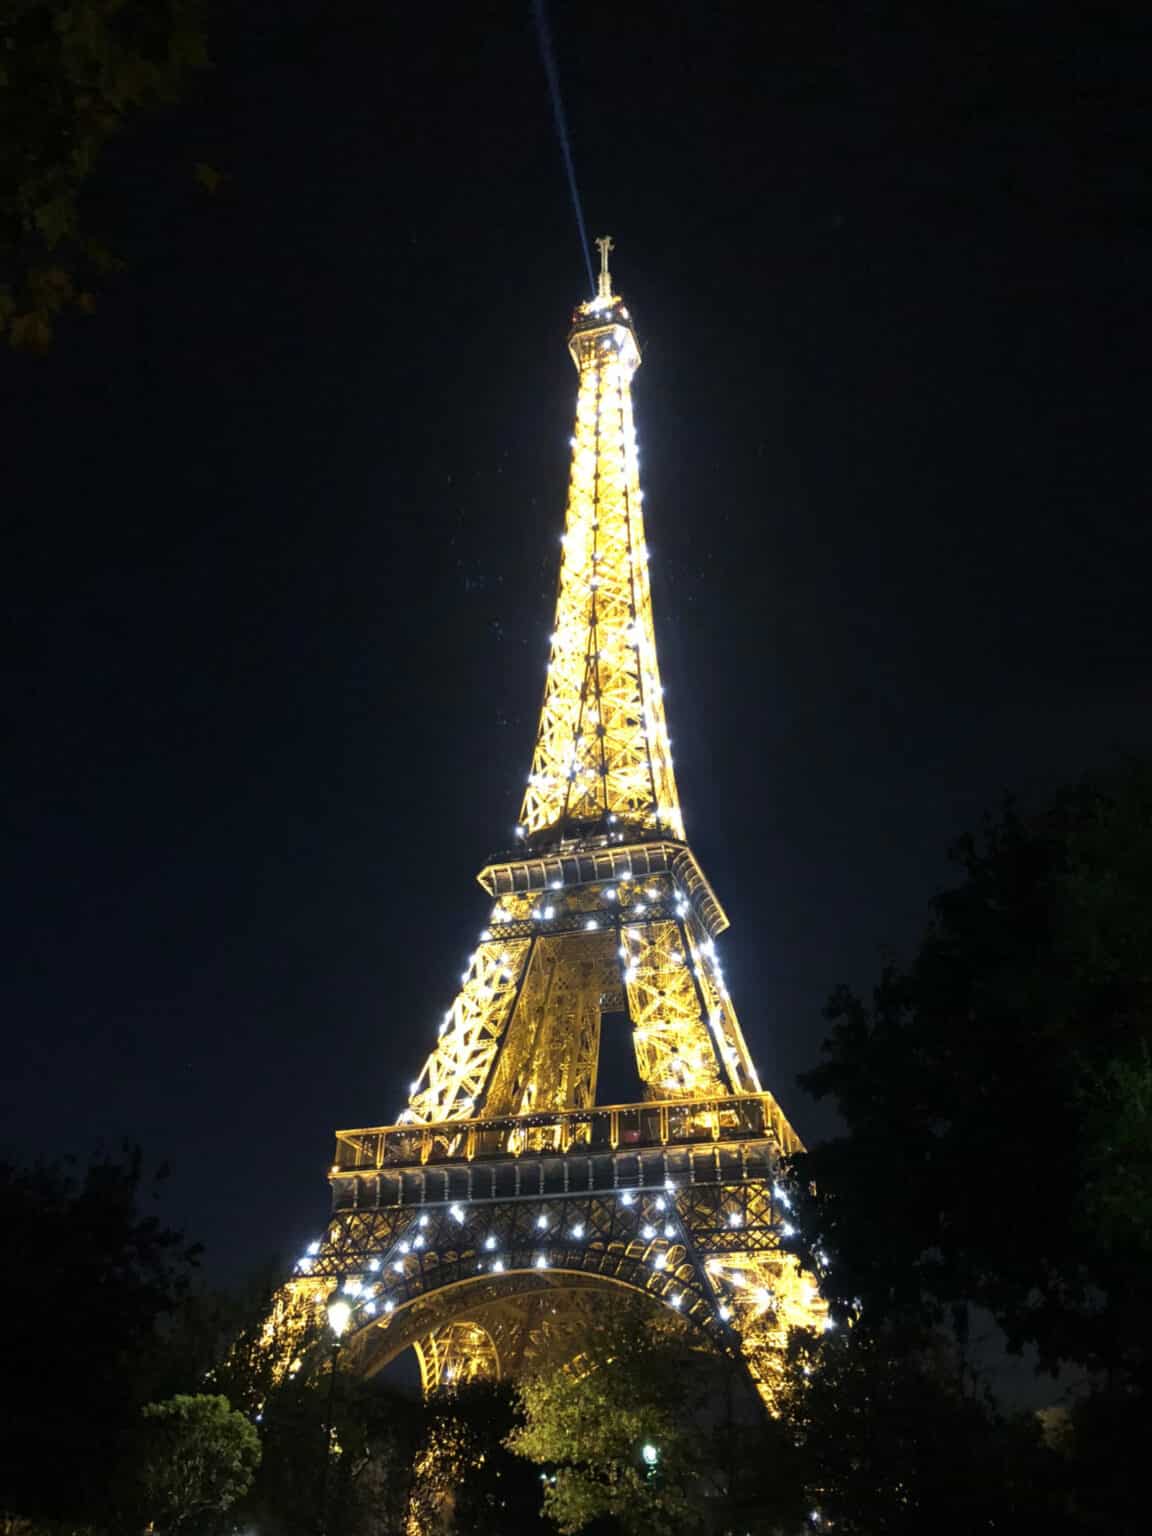 The Best Views of The Eiffel Tower In Paris - wit & whimsy